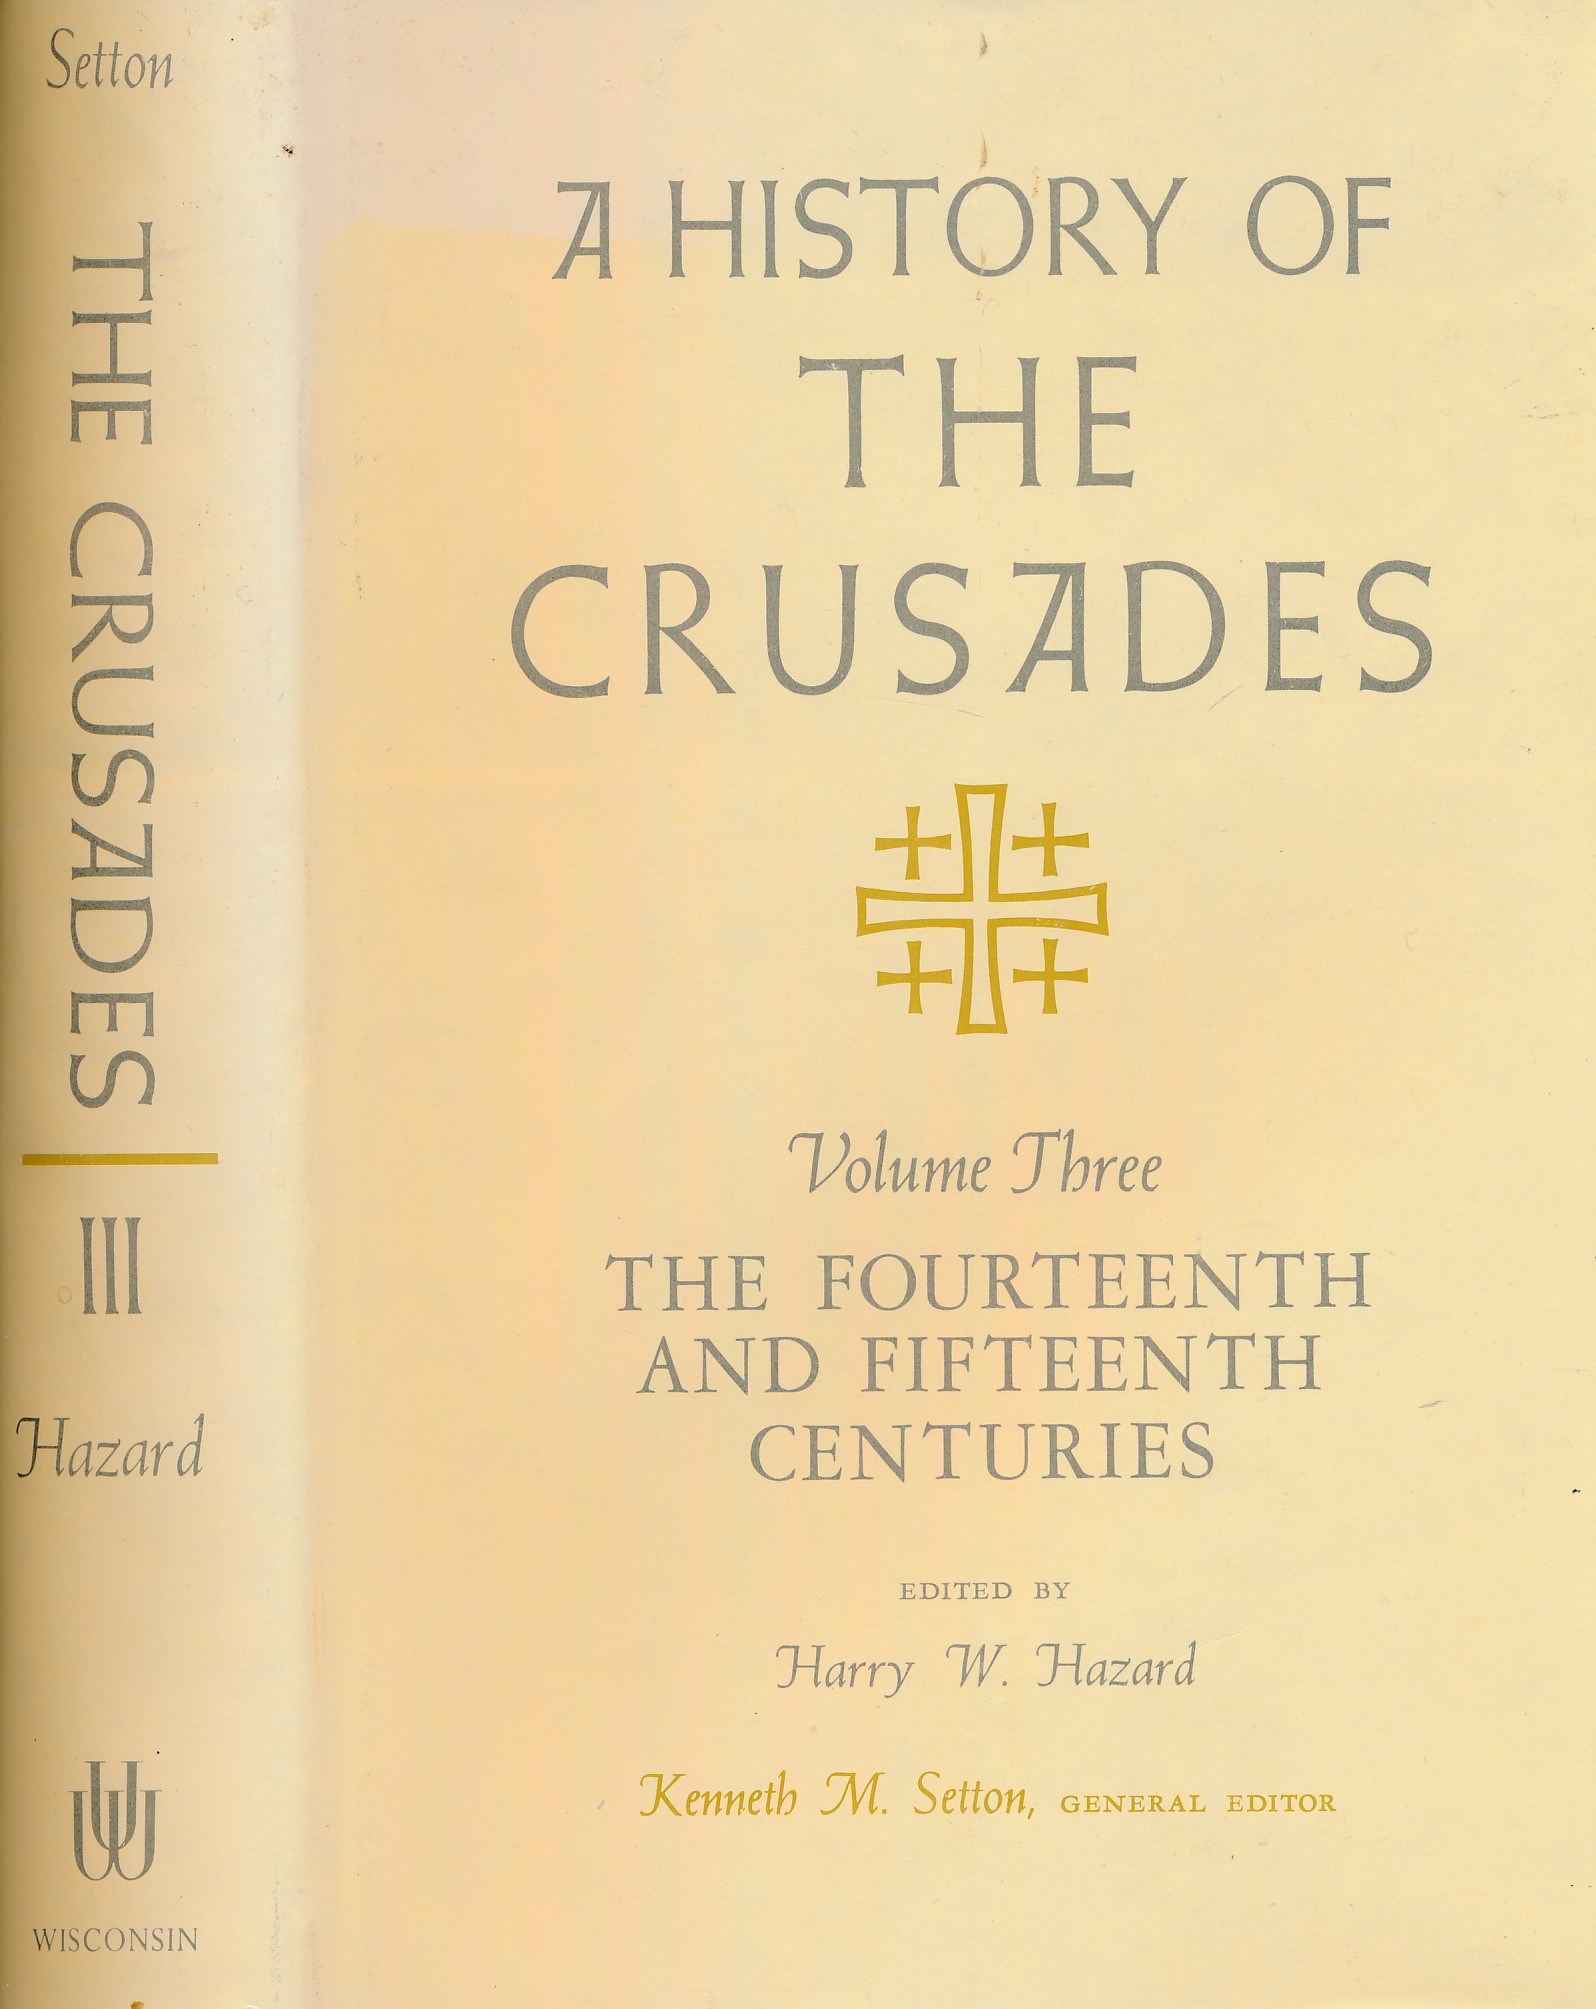 A History of the Crusades. Volume Three. The Fourteenth and Fifteenth Centuries